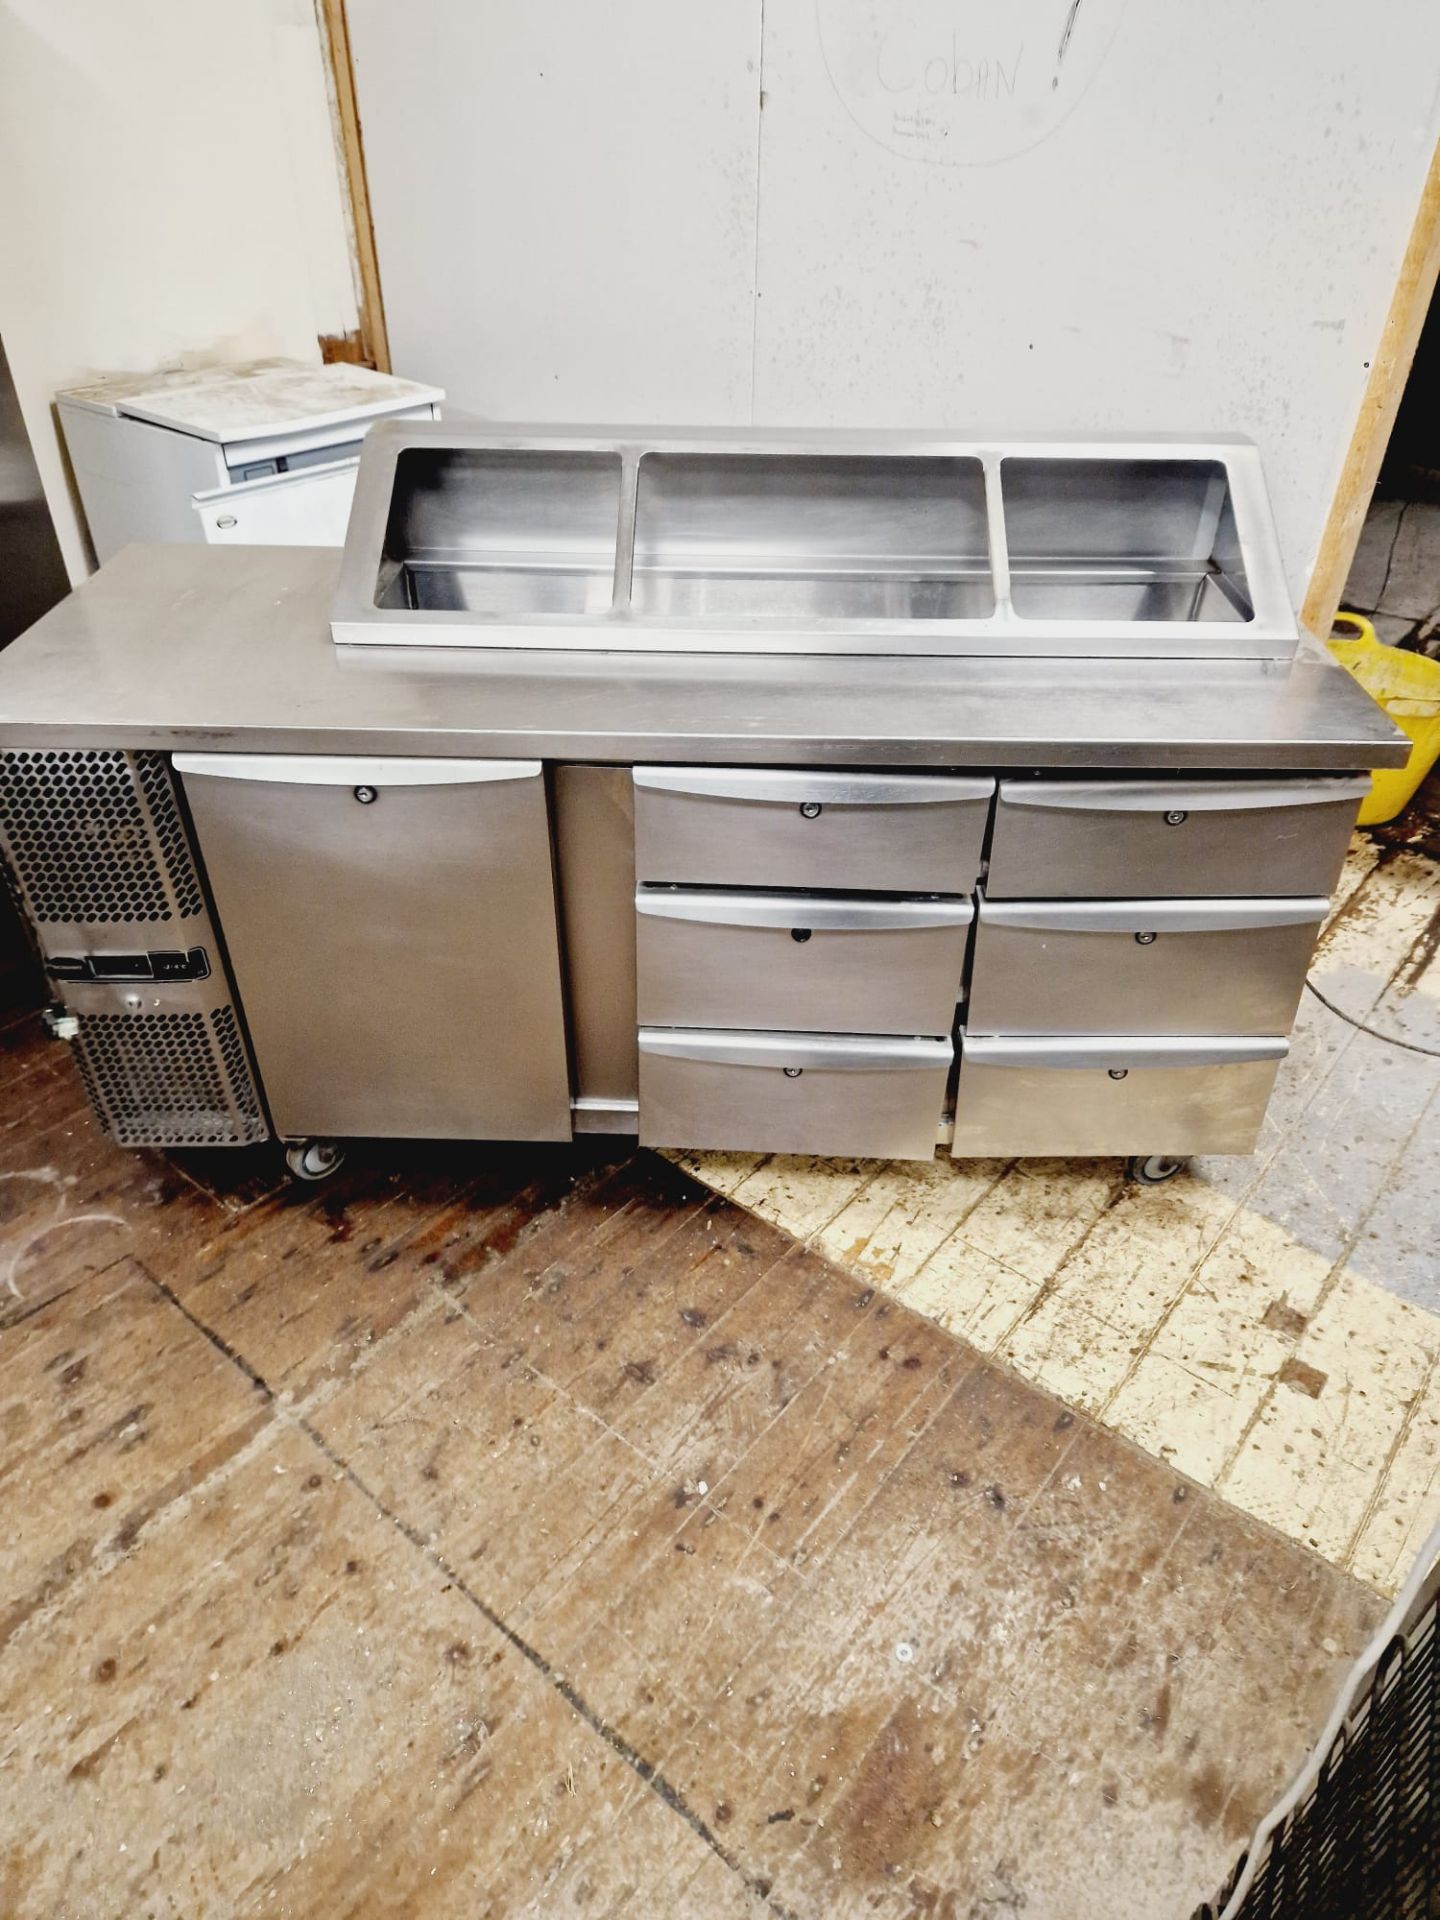 PRECISION 6 DRAWER AND 1 DOOR PERP FRIDGE SALD BAR - PIZZA PREP FRIDGE - FULLY WORKING AND SERVICED